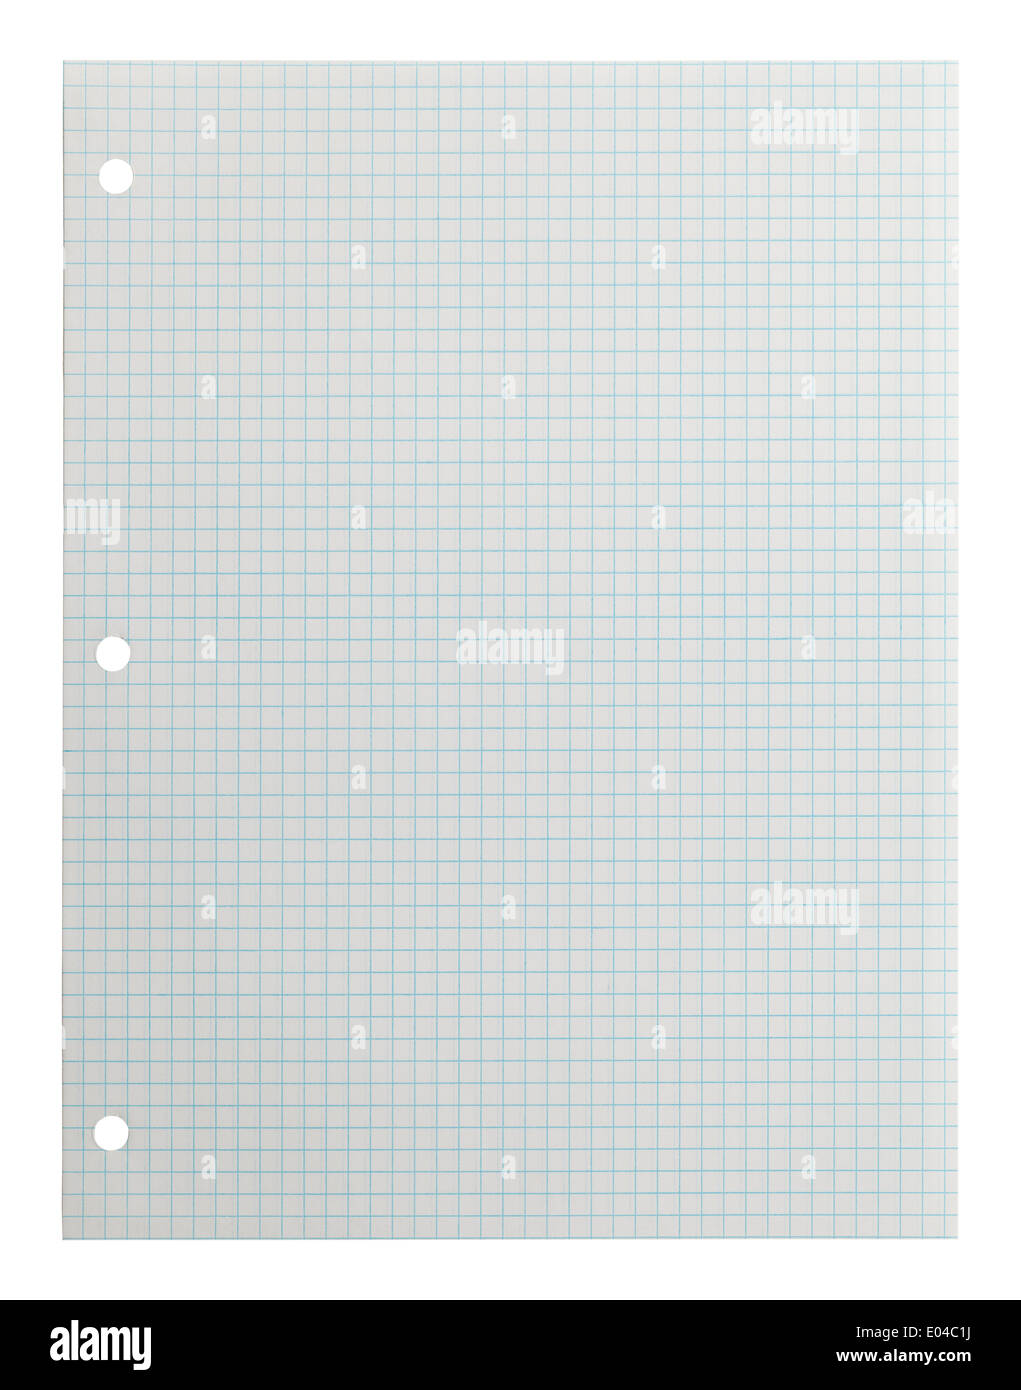 Blank Graph Paper Isolated on White Background. Stock Photo